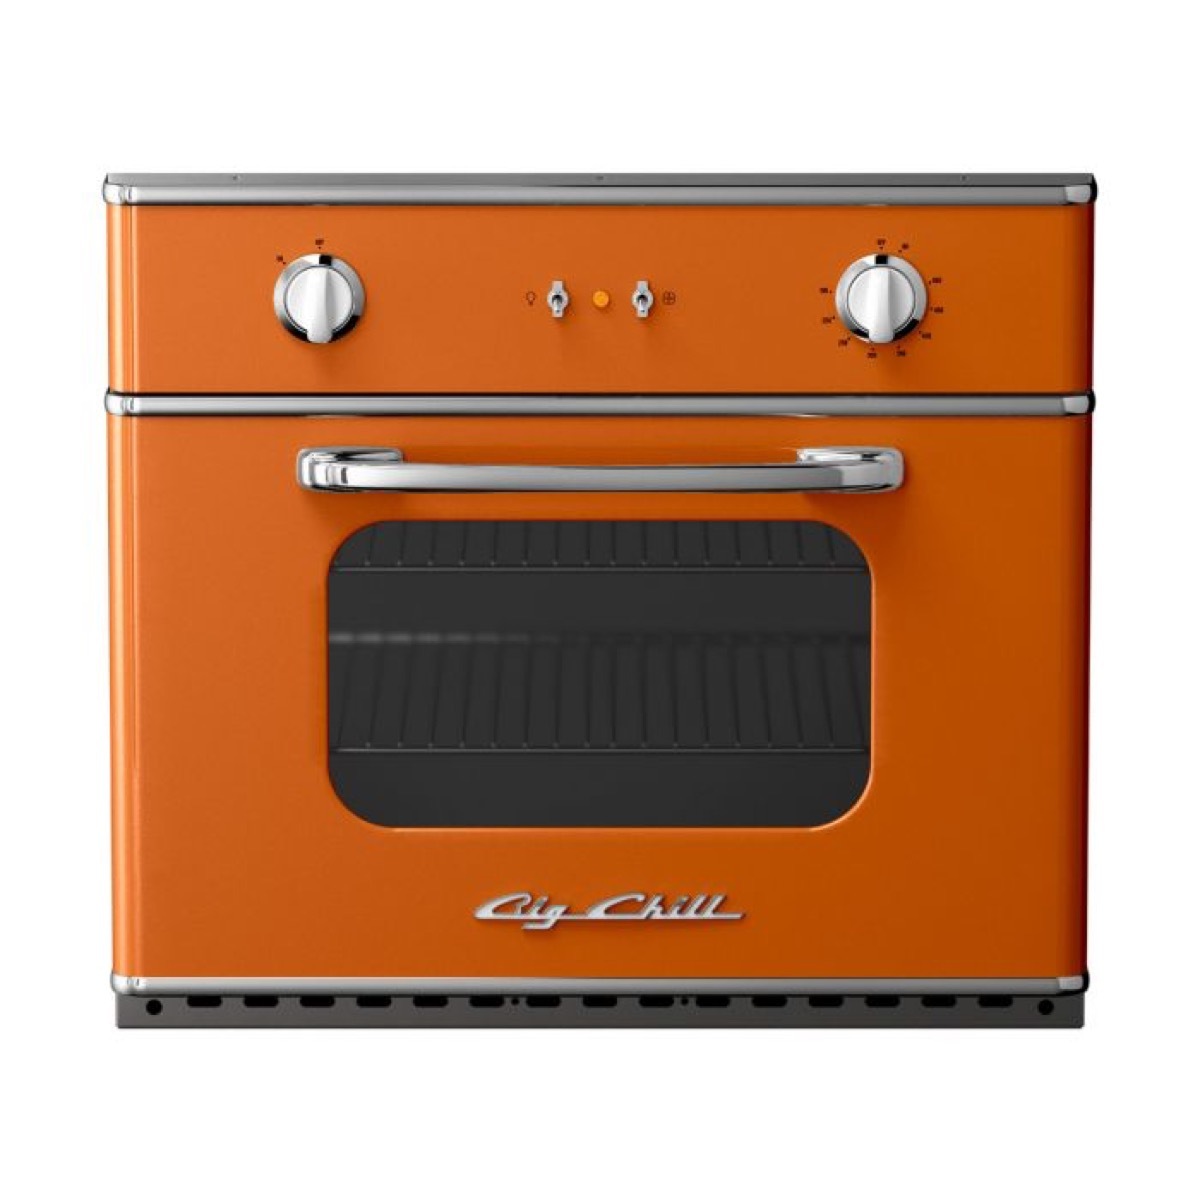 big chill electric wall oven vintage home features